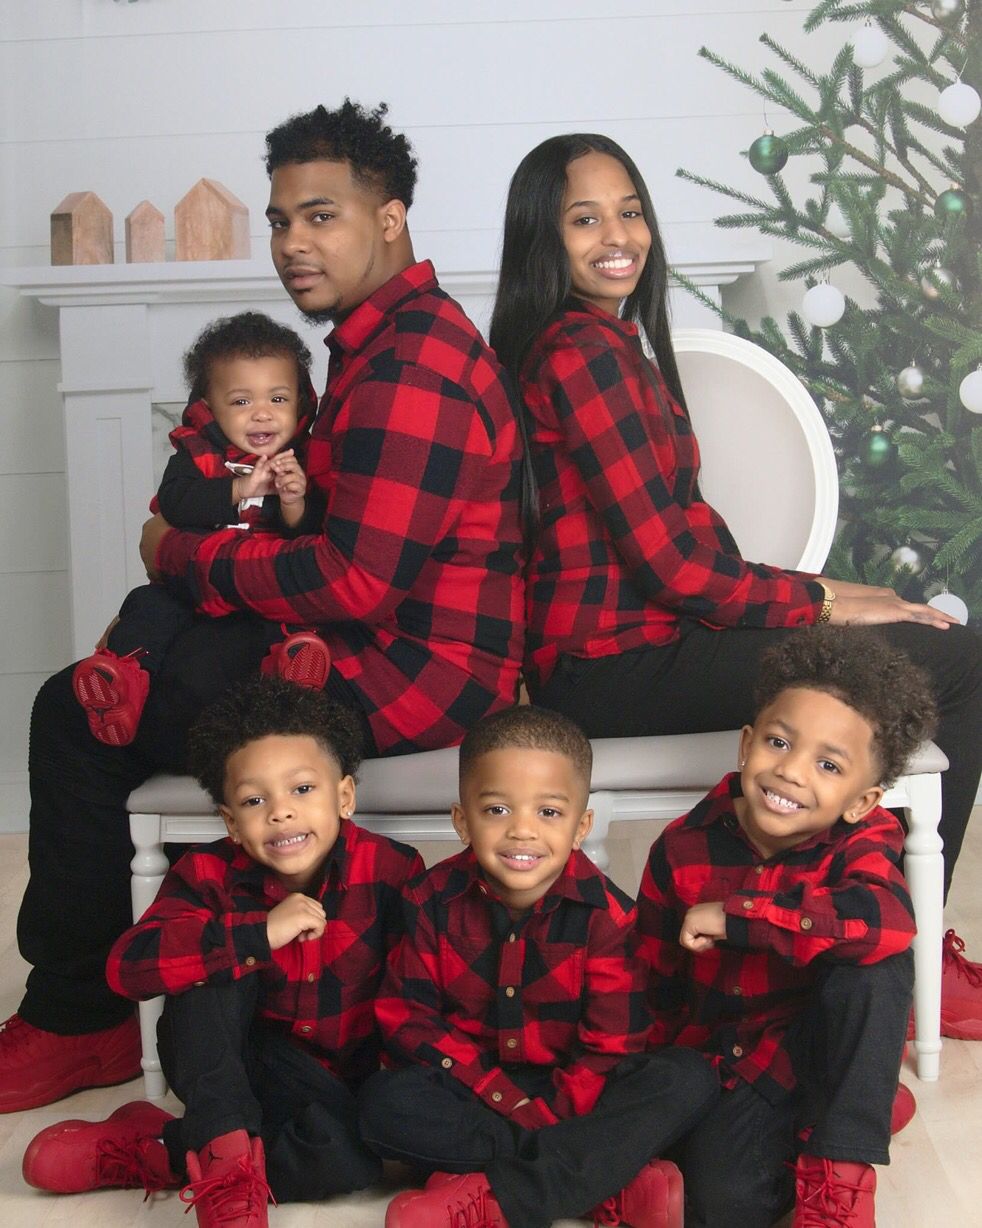 Matching Outfits . 70+ Best Family Photoshoot Outfit Ideas That You Must Check - 15